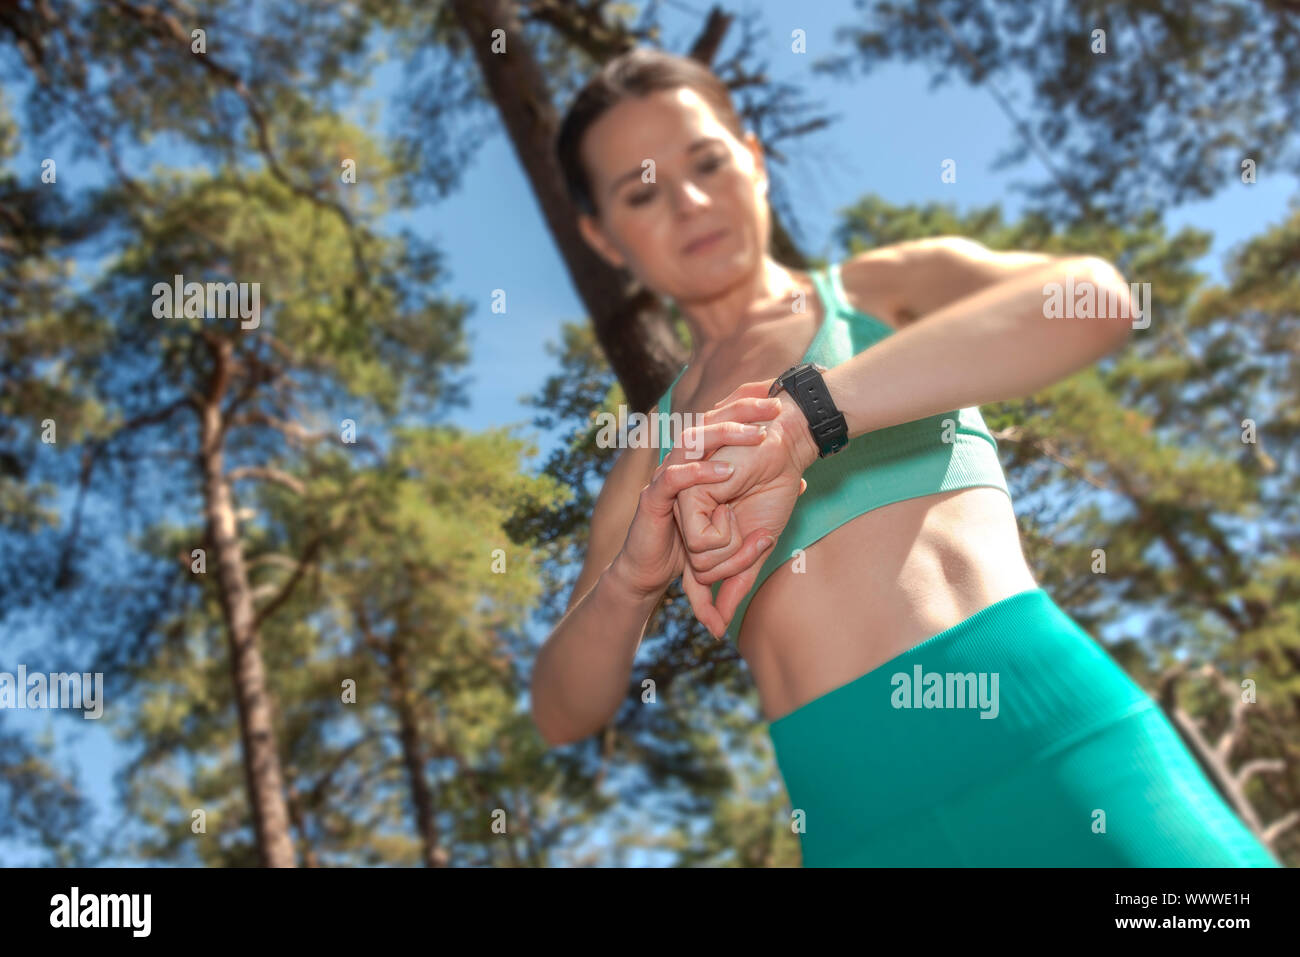 woman checking her fitness tracker watch Stock Photo